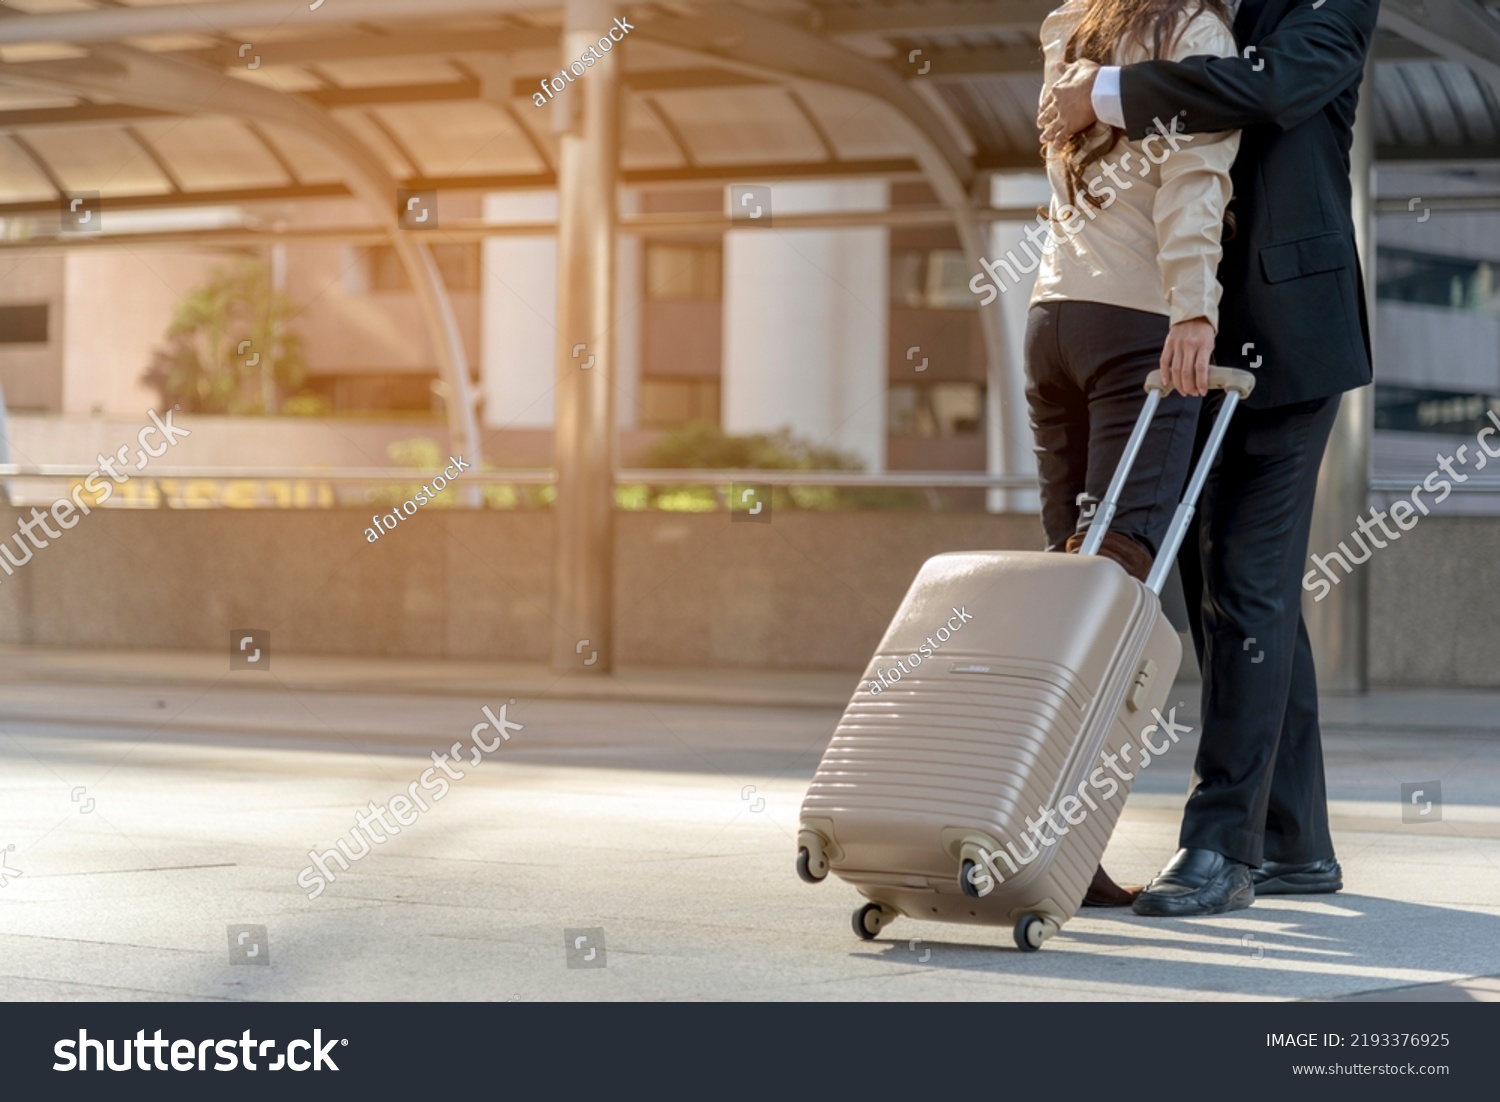 Businesspeople couple lover walking with luggage in business trip. Honeymoon business trip hug together on boarding arrival terminal. Business travel trip holding suitcase at airport couple traveller #2193376925